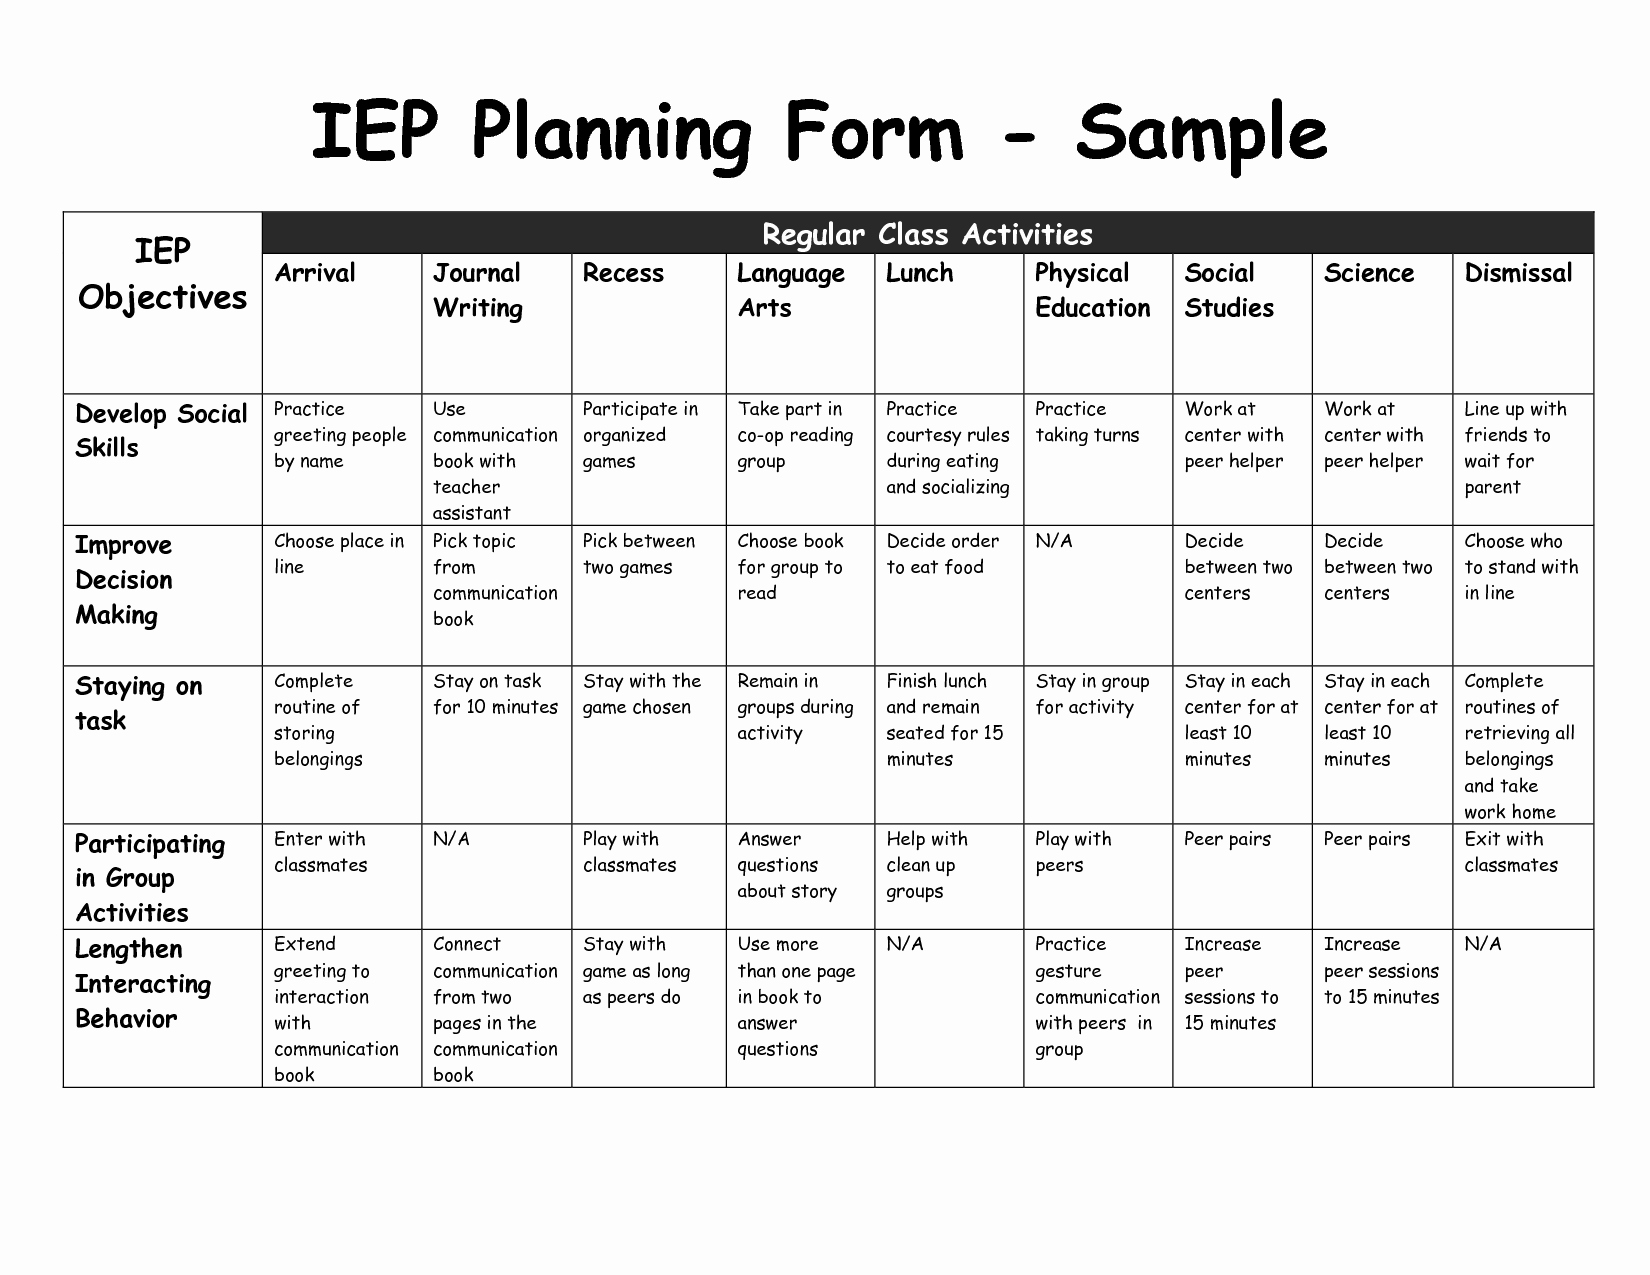 Personal Learning Plan Template Fresh Iep Iep Planning form Sample